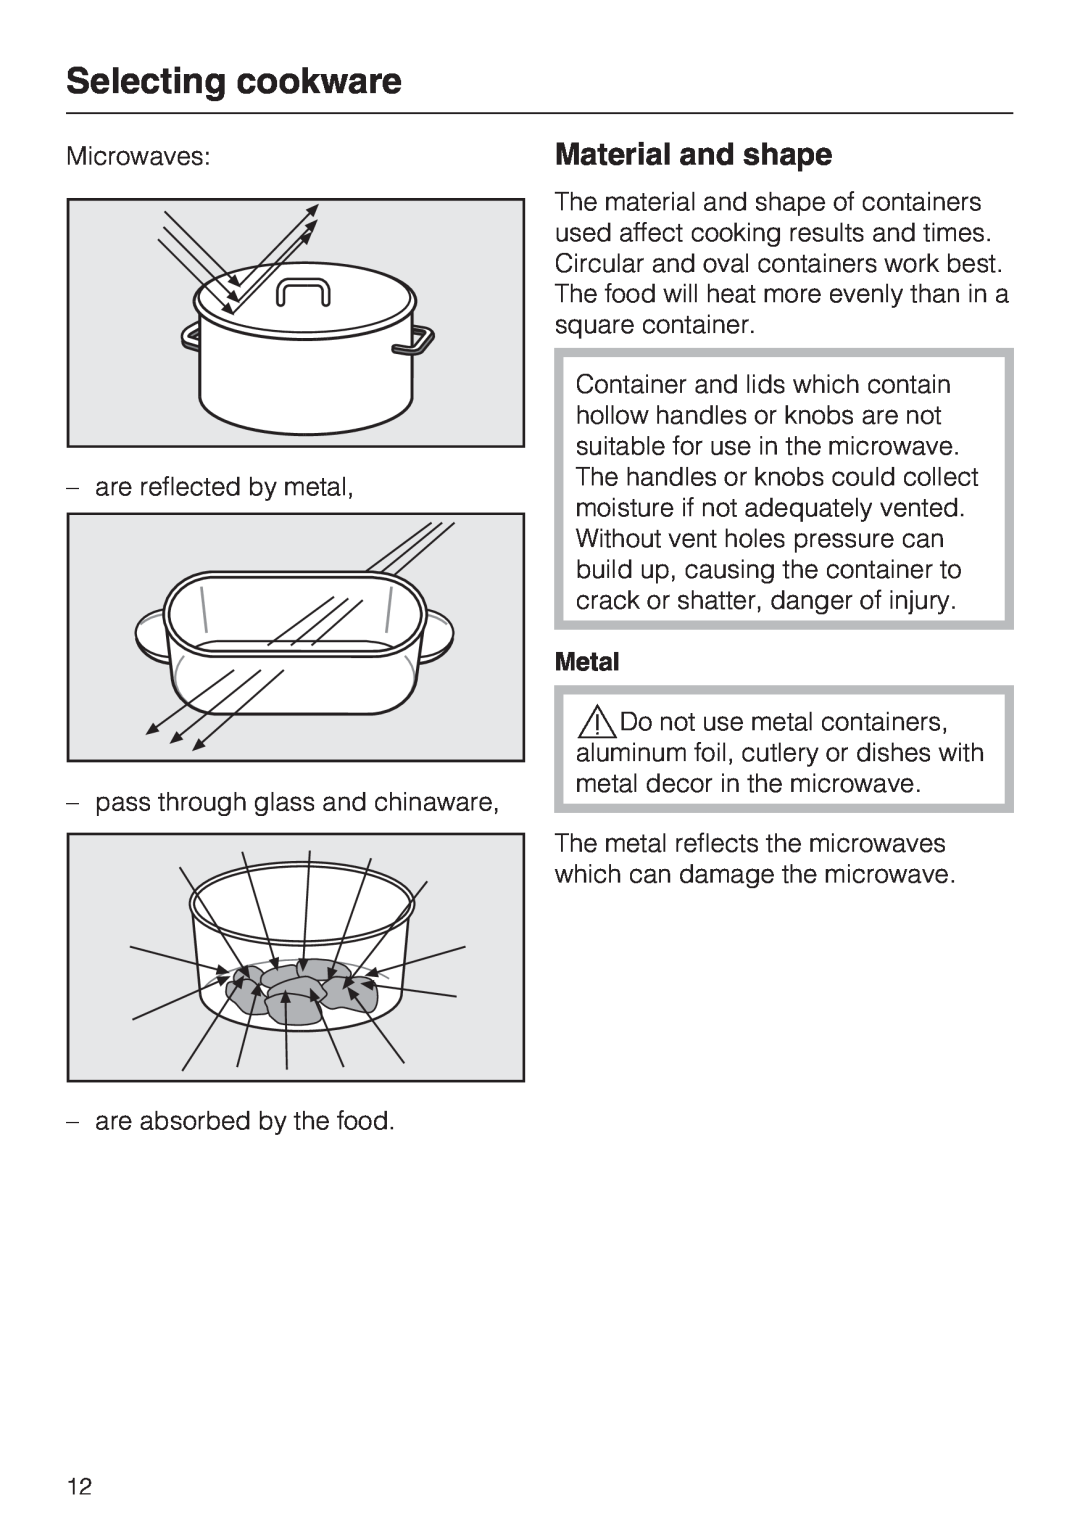 Miele M8260-1 installation instructions Selecting cookware, Material and shape, Metal 